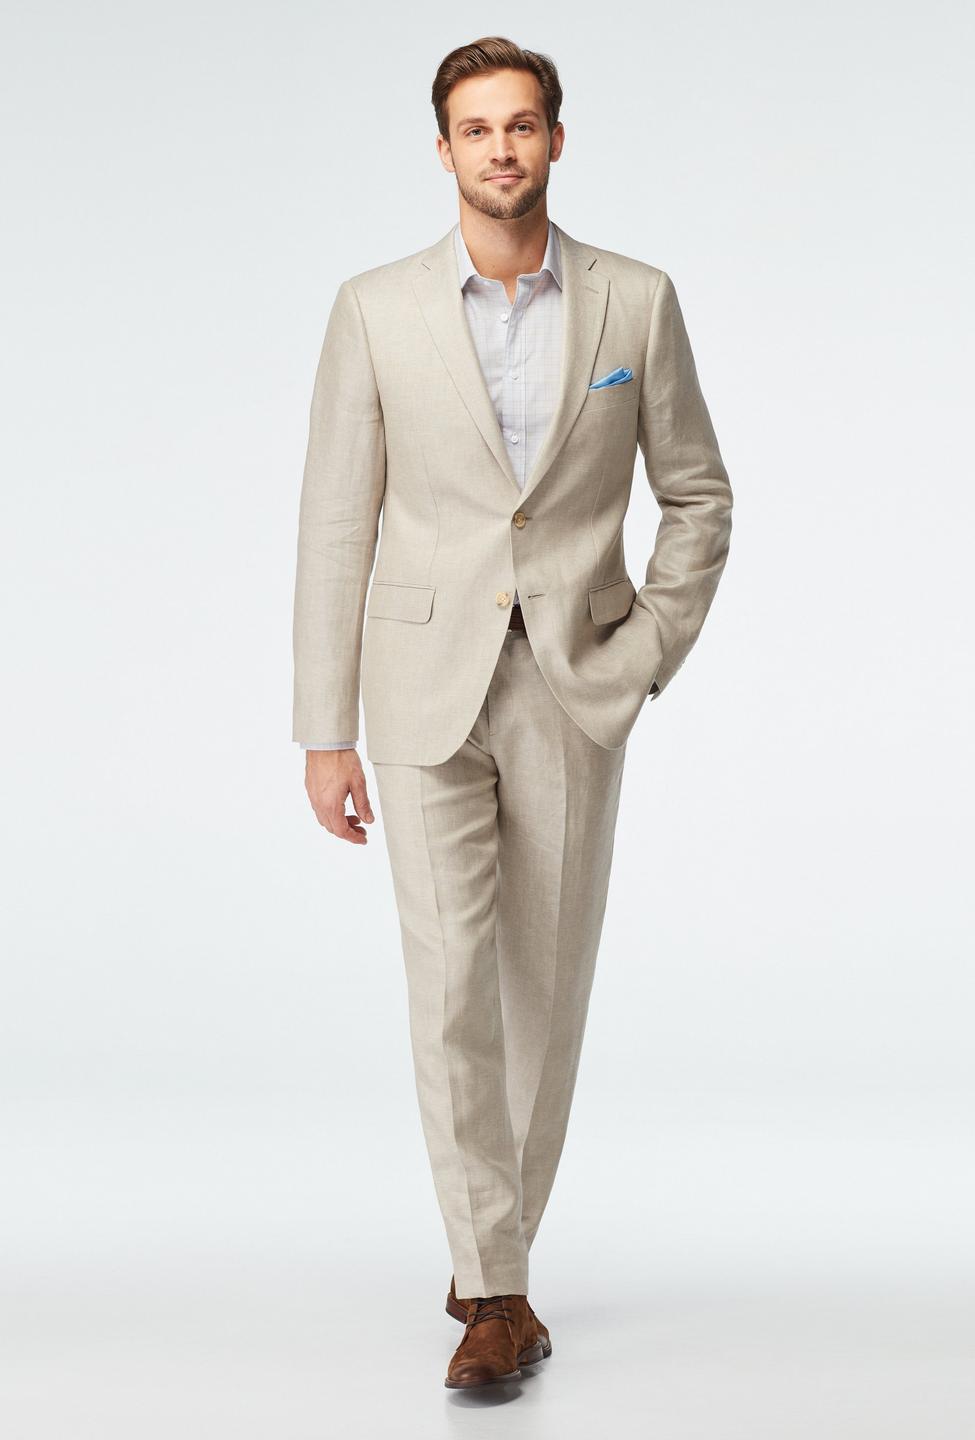 Brown suit - Sailsbury Solid Design from Seasonal Indochino Collection